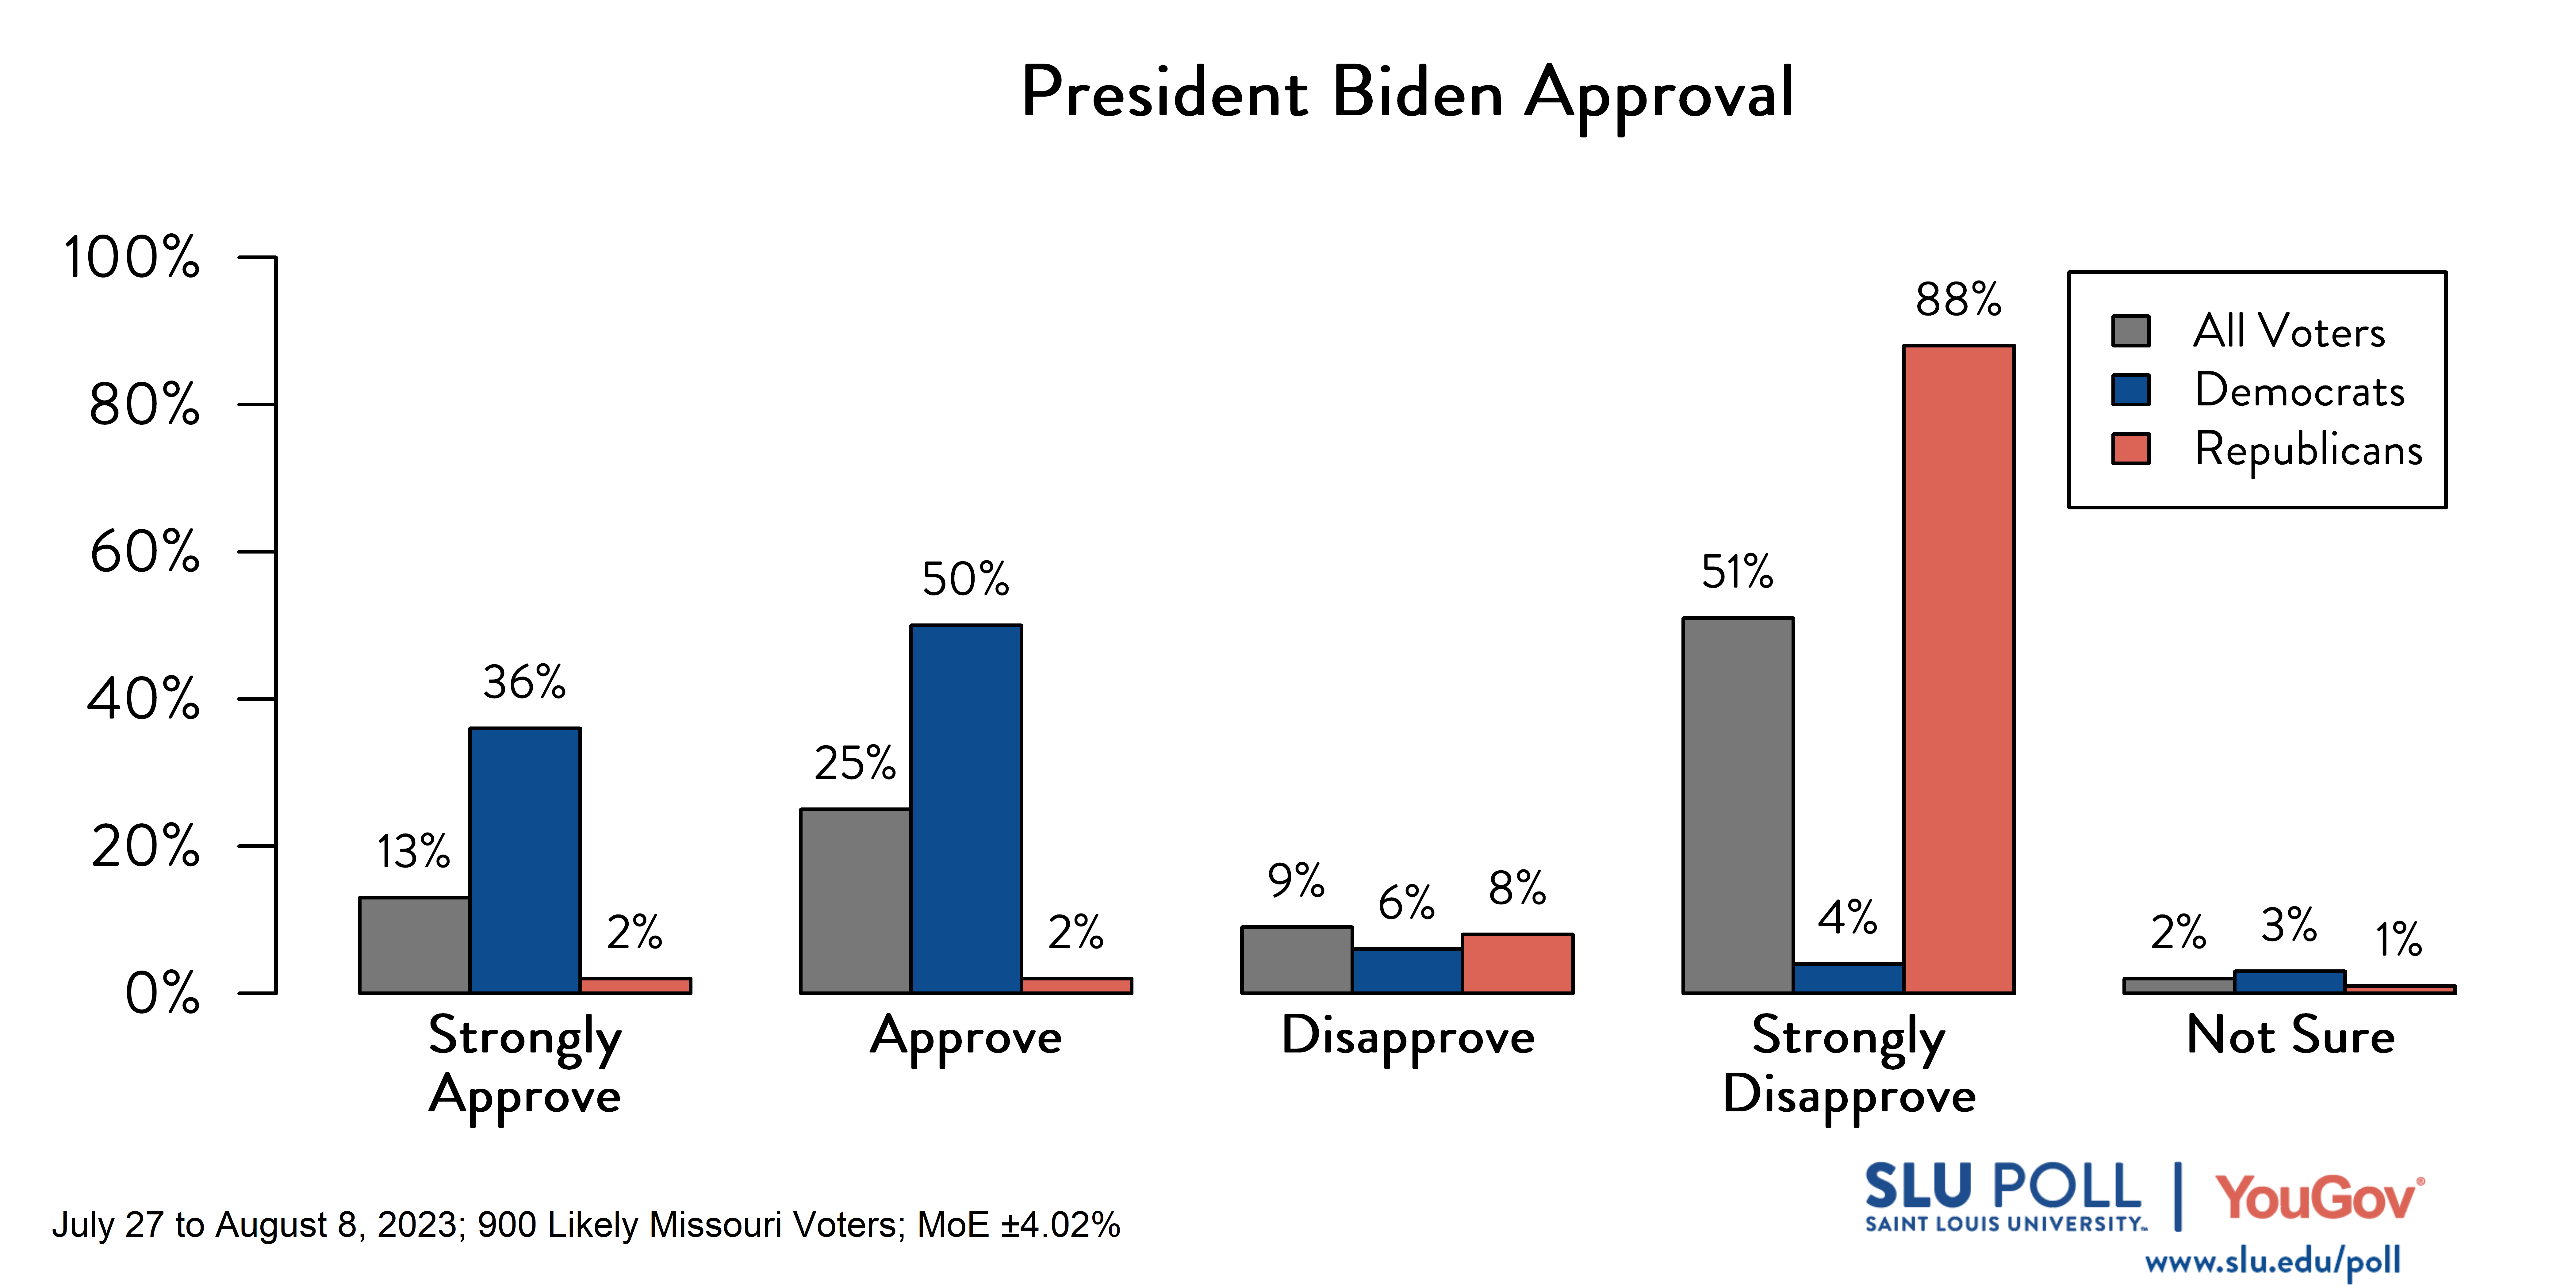 Likely voters' responses to 'Do you approve or disapprove of the way each is doing their job: President Joe Biden?': 13% Strongly approve, 25% Approve, 9% Disapprove, 51% Strongly disapprove, and 2% Not sure. Democratic voters' responses: ' 36% Strongly approve, 50% Approve, 6% Disapprove, 4% Strongly disapprove, and 3% Not sure. Republican voters' responses: 2% Strongly approve, 2% Approve, 8% Disapprove, 88% Strongly disapprove, and 1% Not sure. 